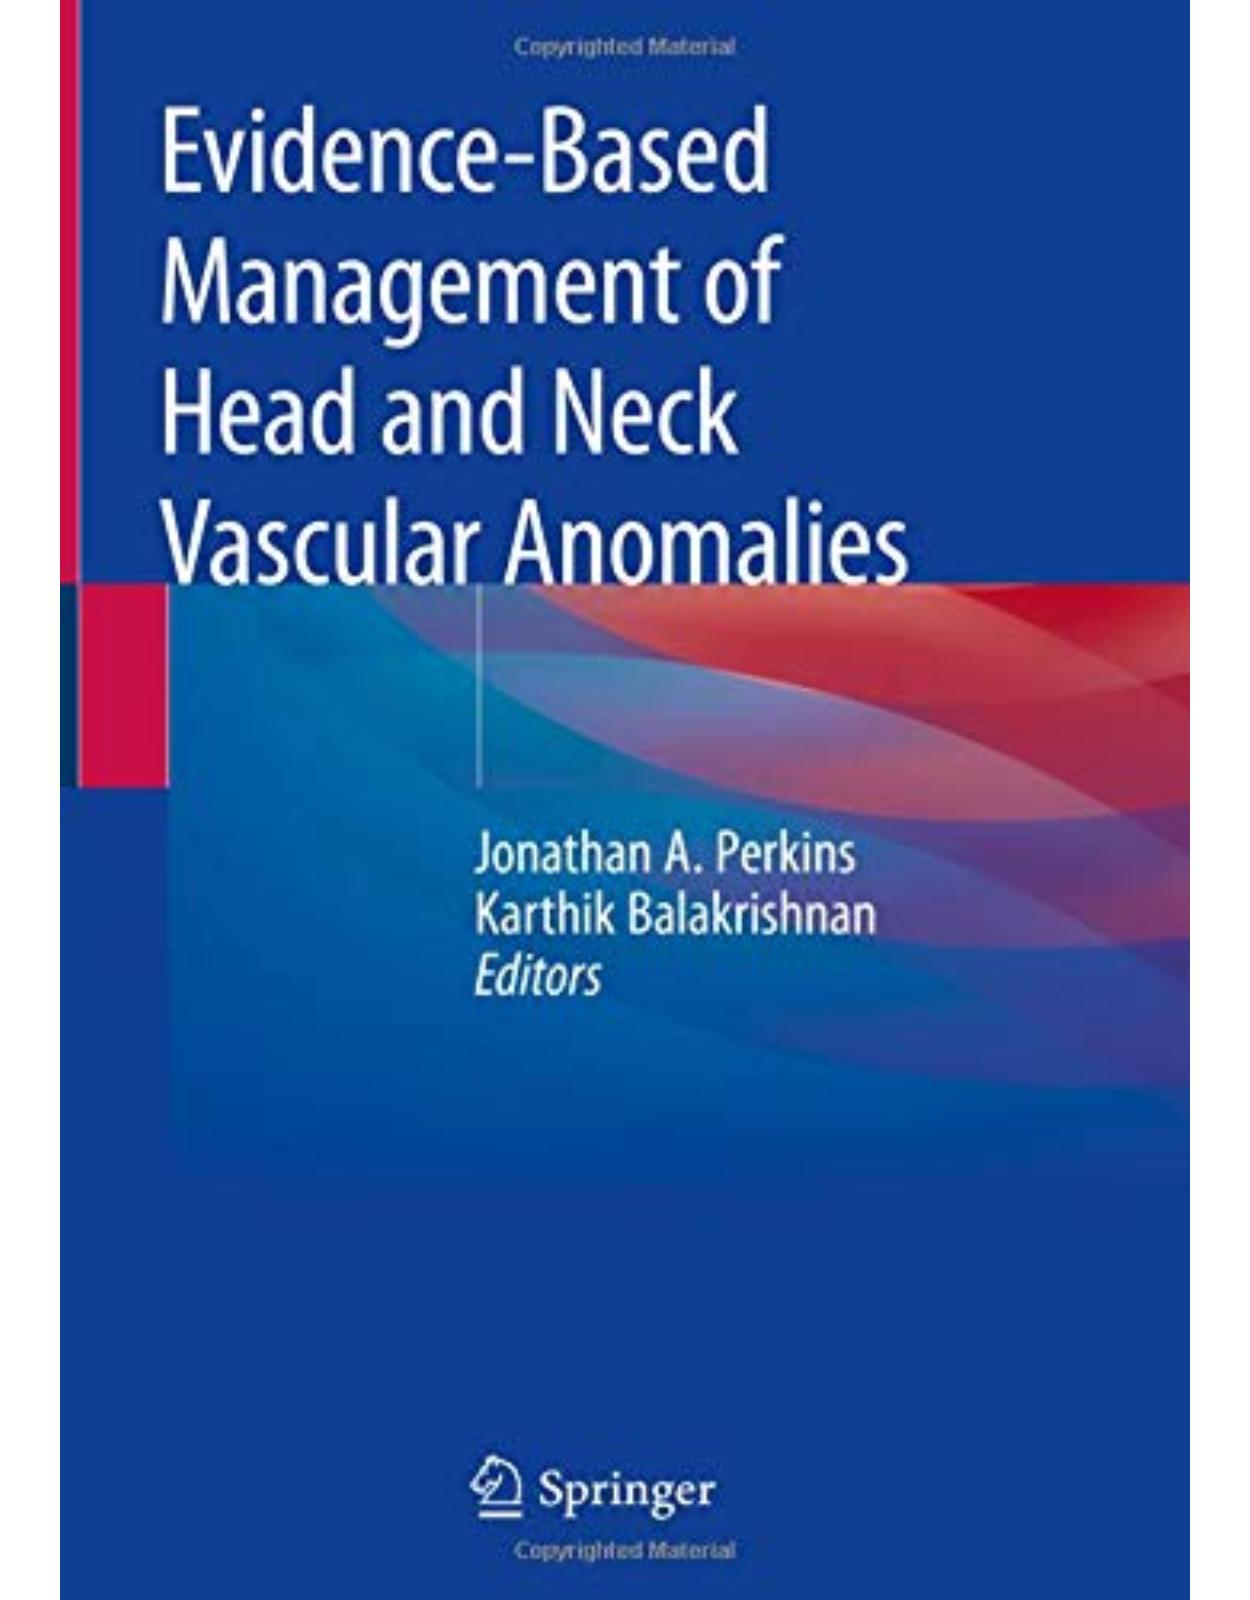 Evidence-Based Management of Head and Neck Vascular Anomalies